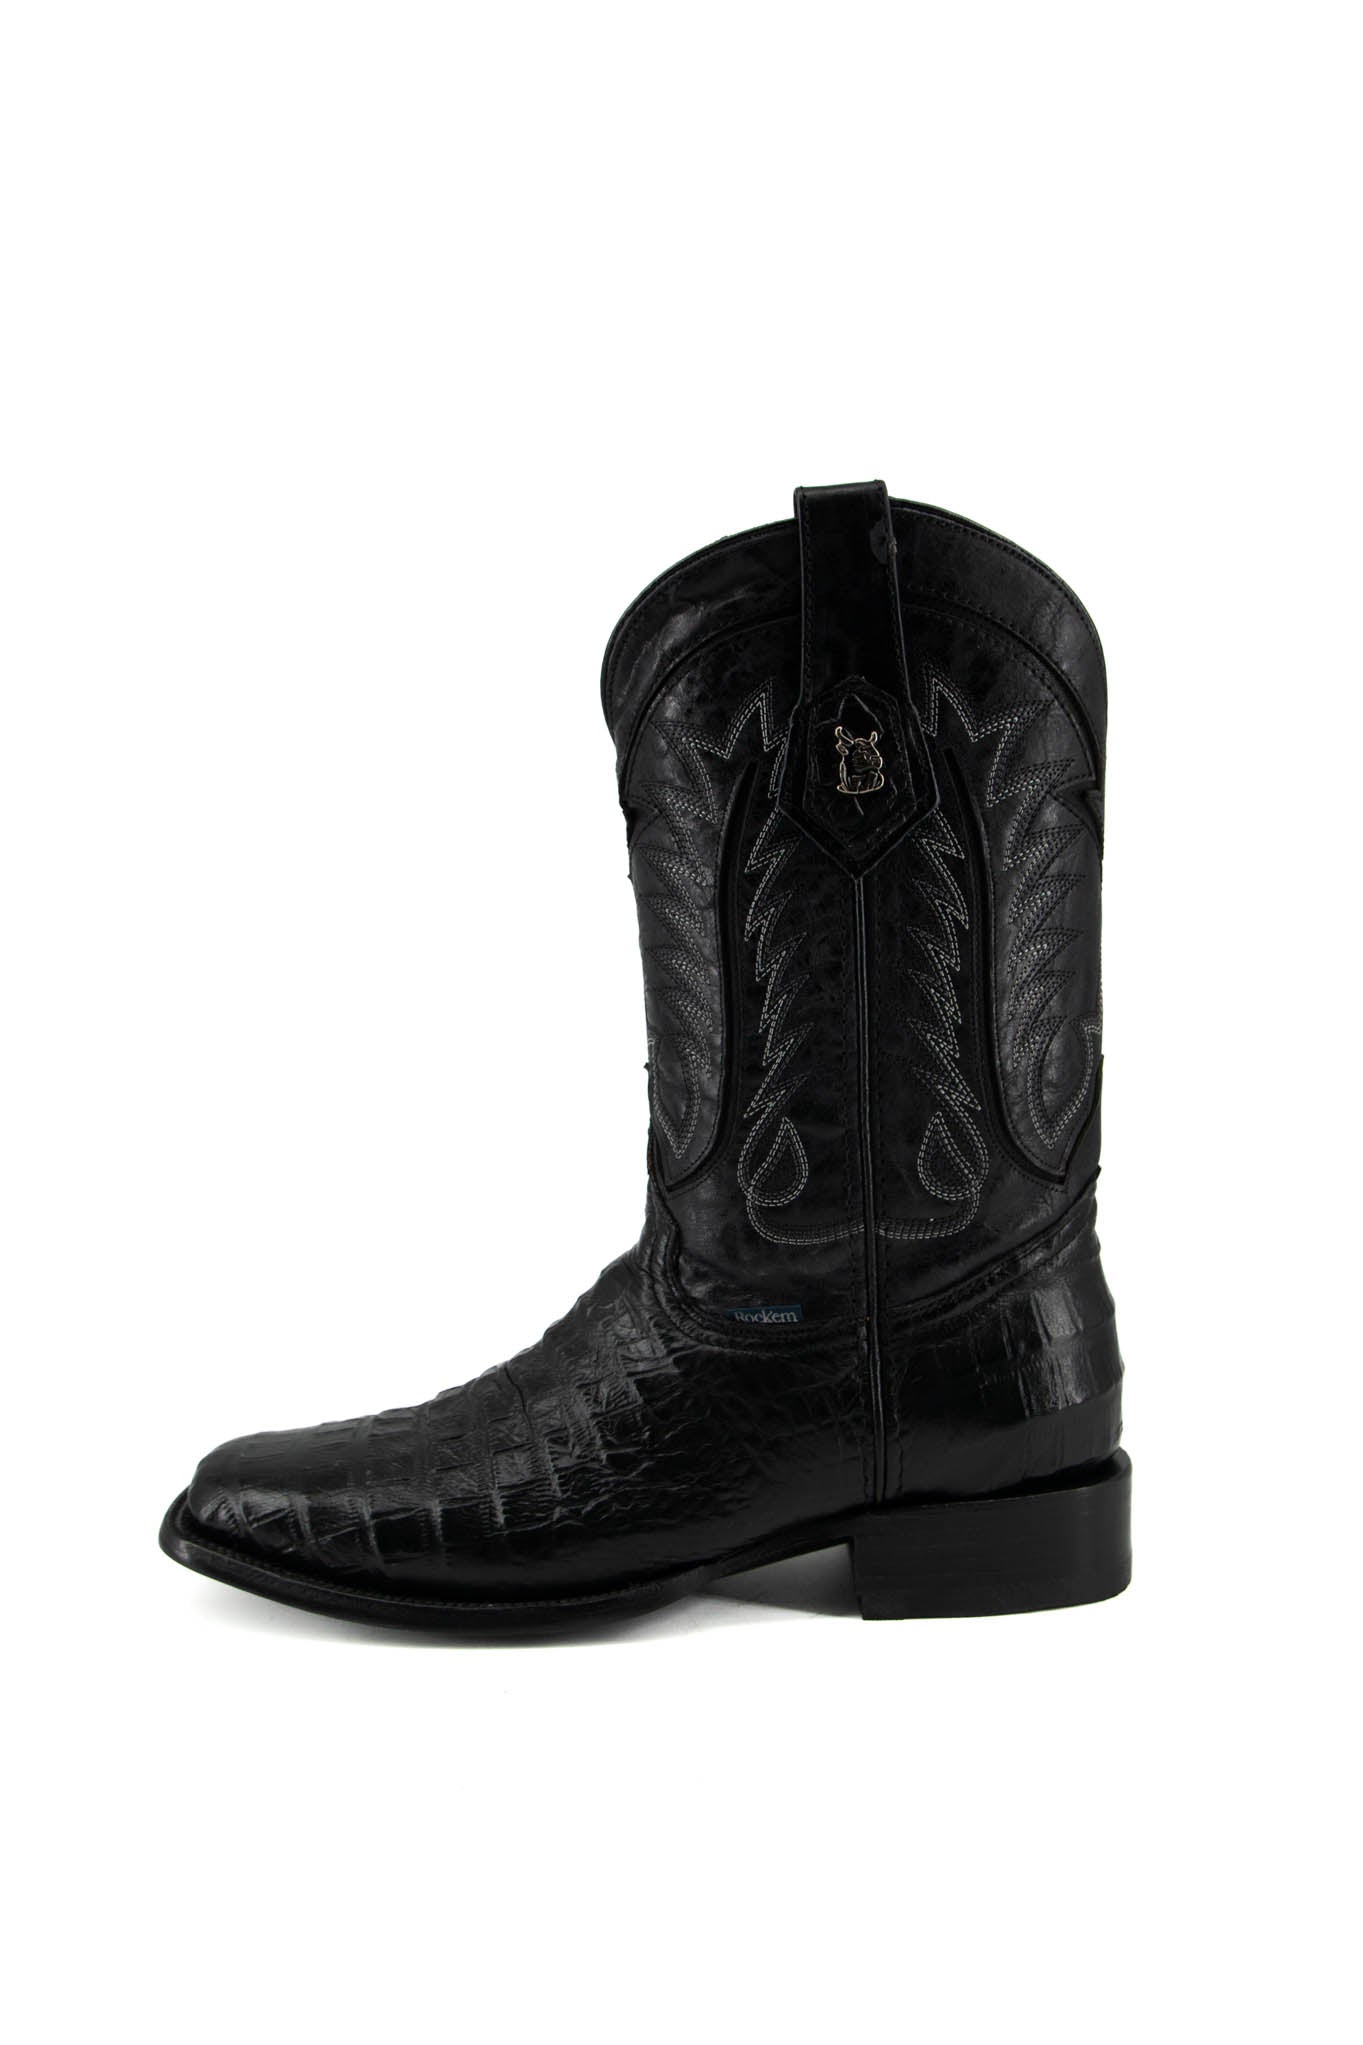 Coco Belly Rodeo Cowboy Boot